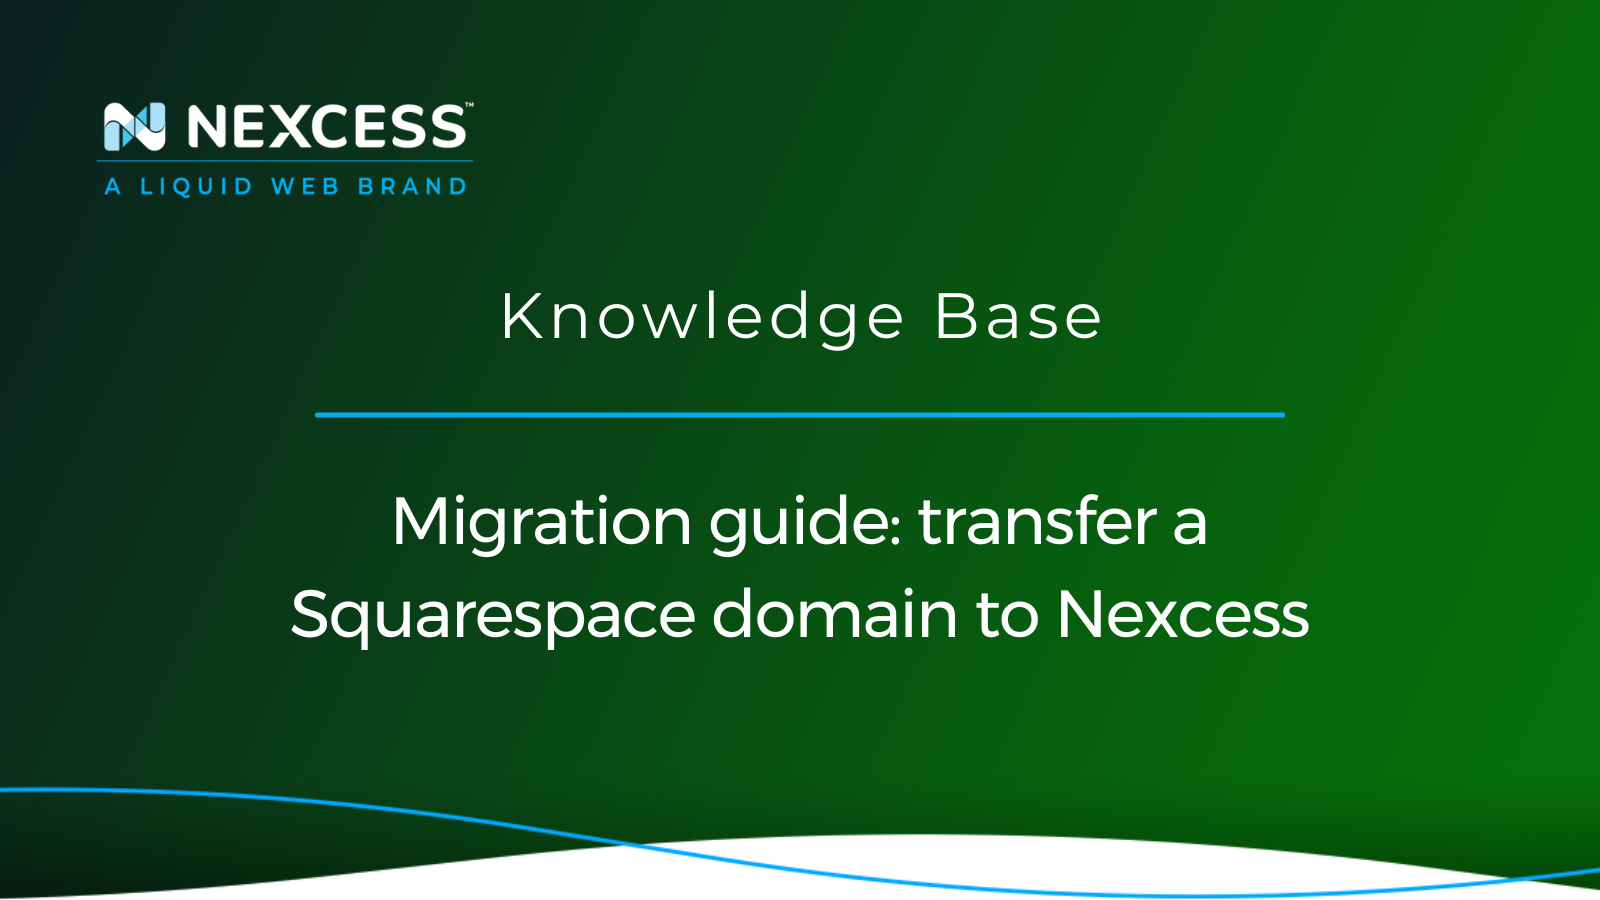 Migration guide: transfer a Squarespace domain to Nexcess